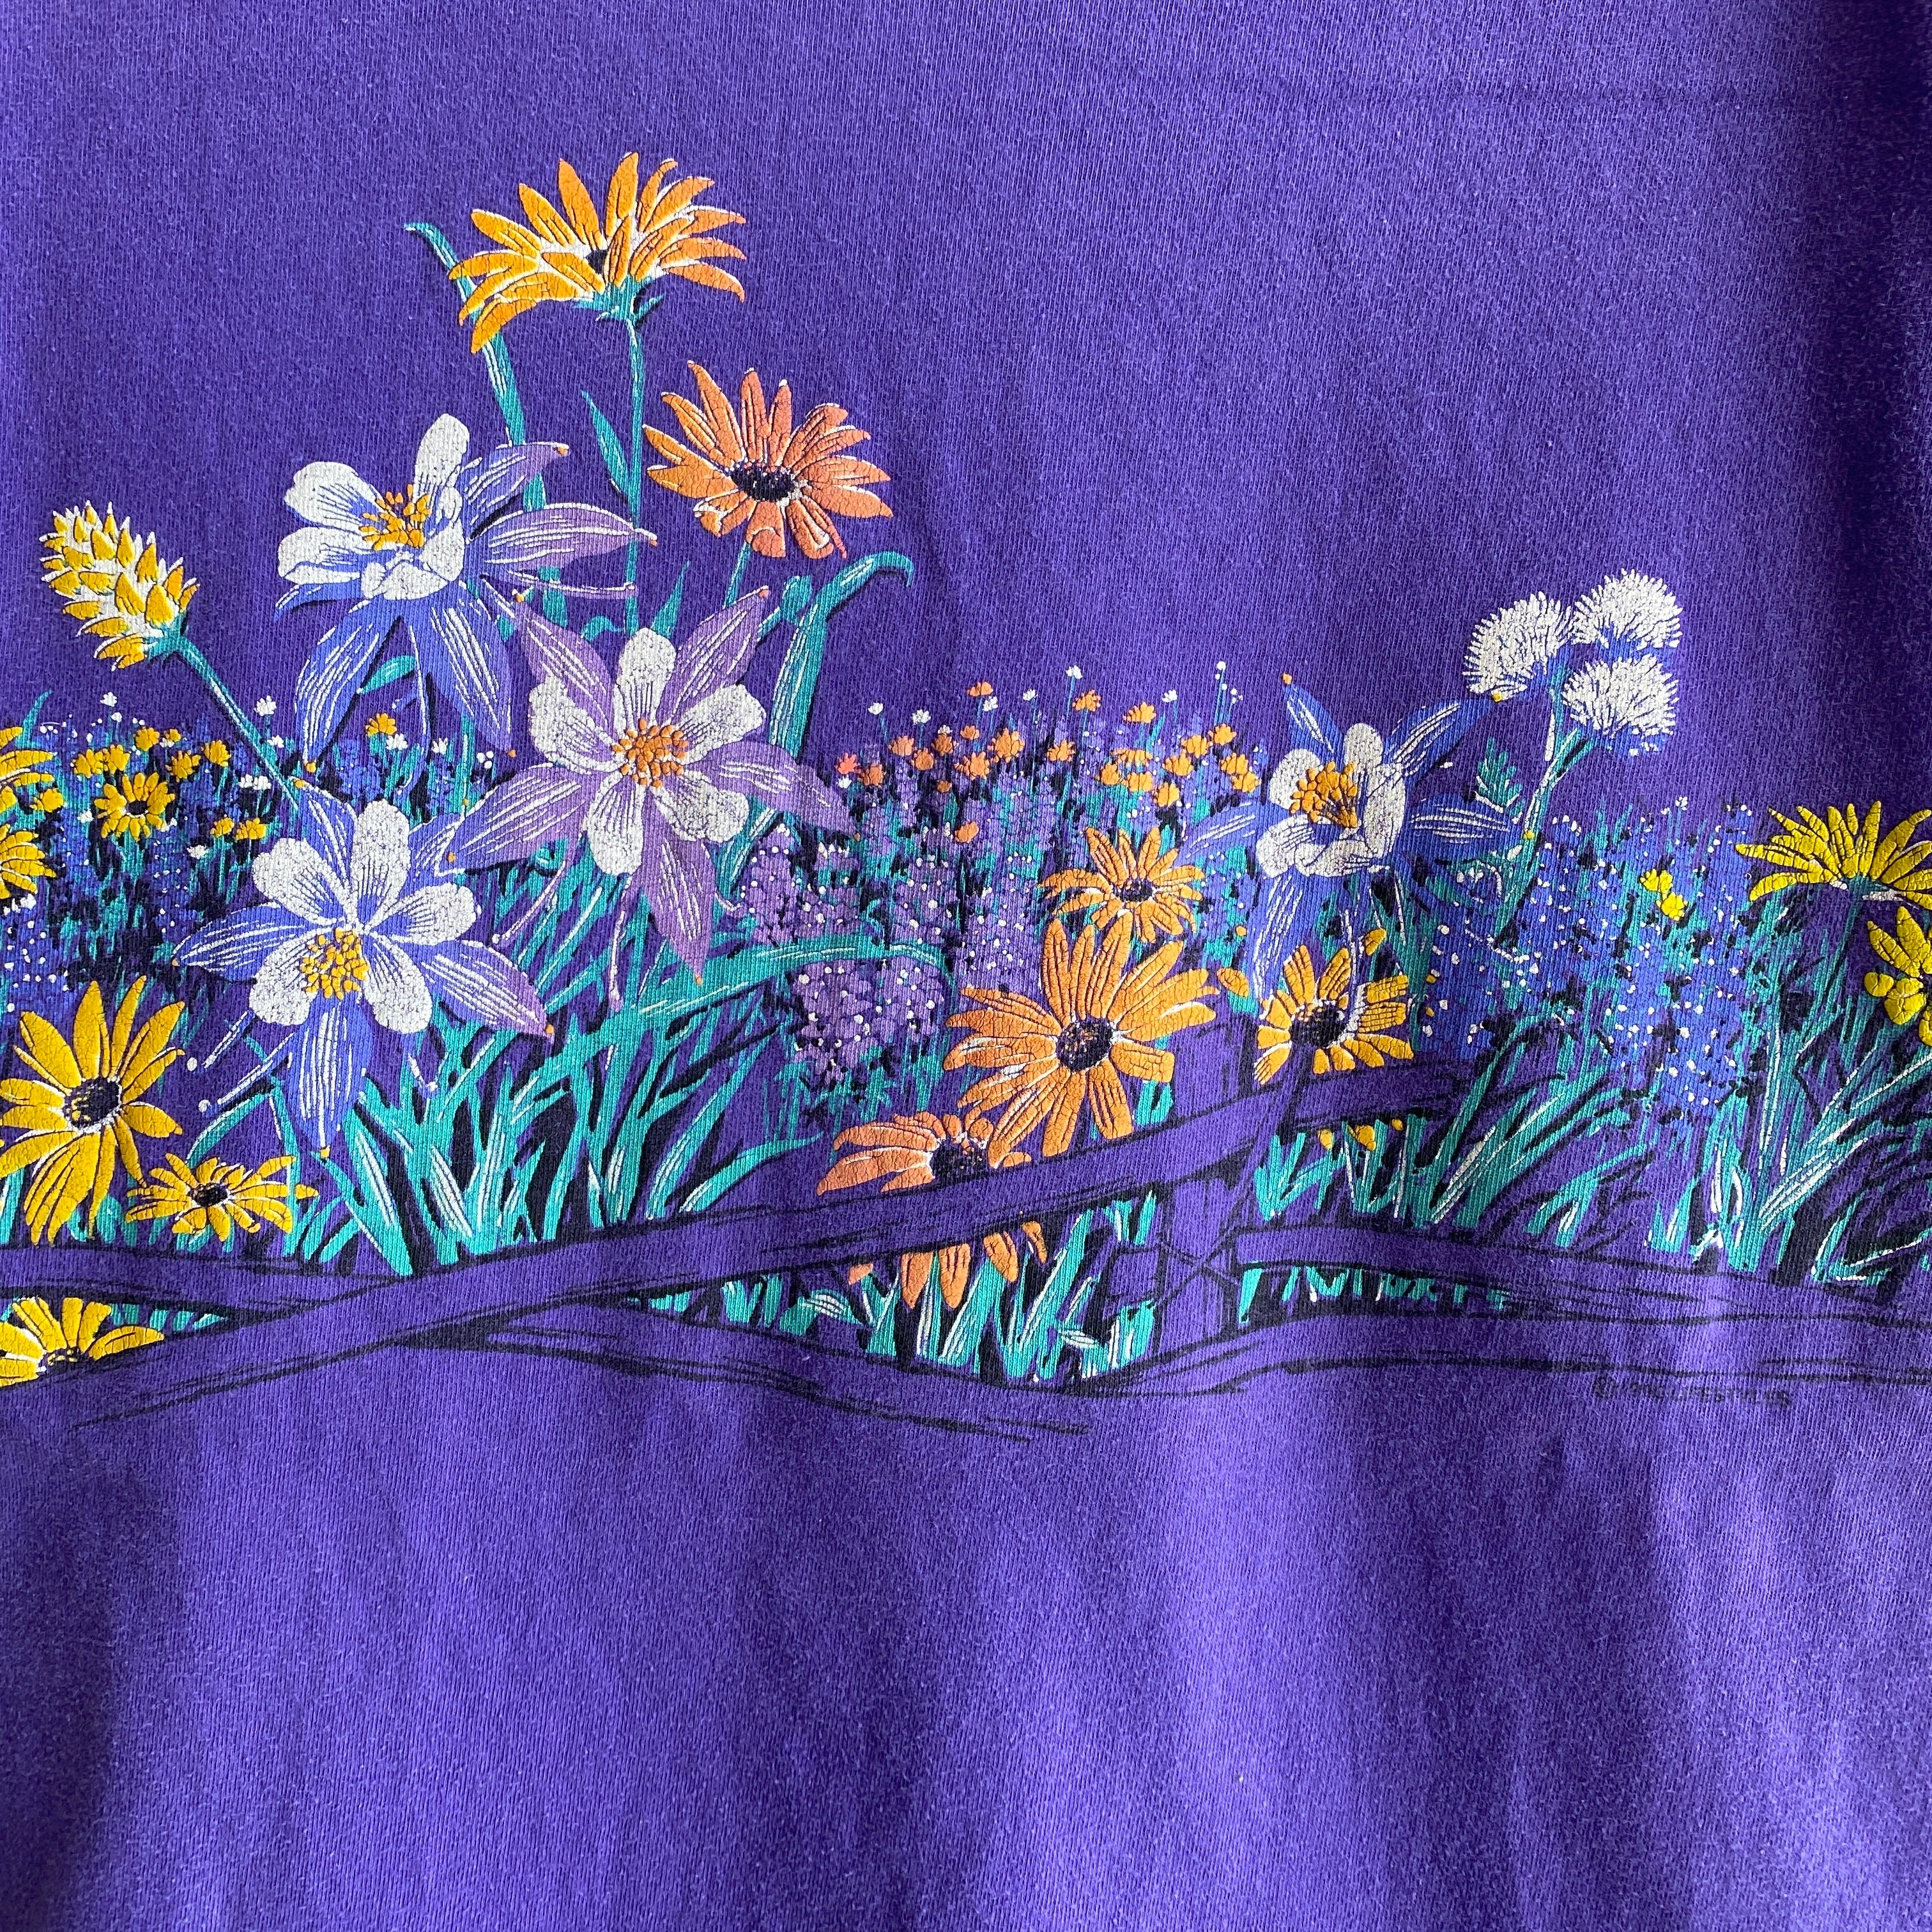 1990 Flower Front and Back T-Shirt That Belonged to Your Elementary School Music Teacher?